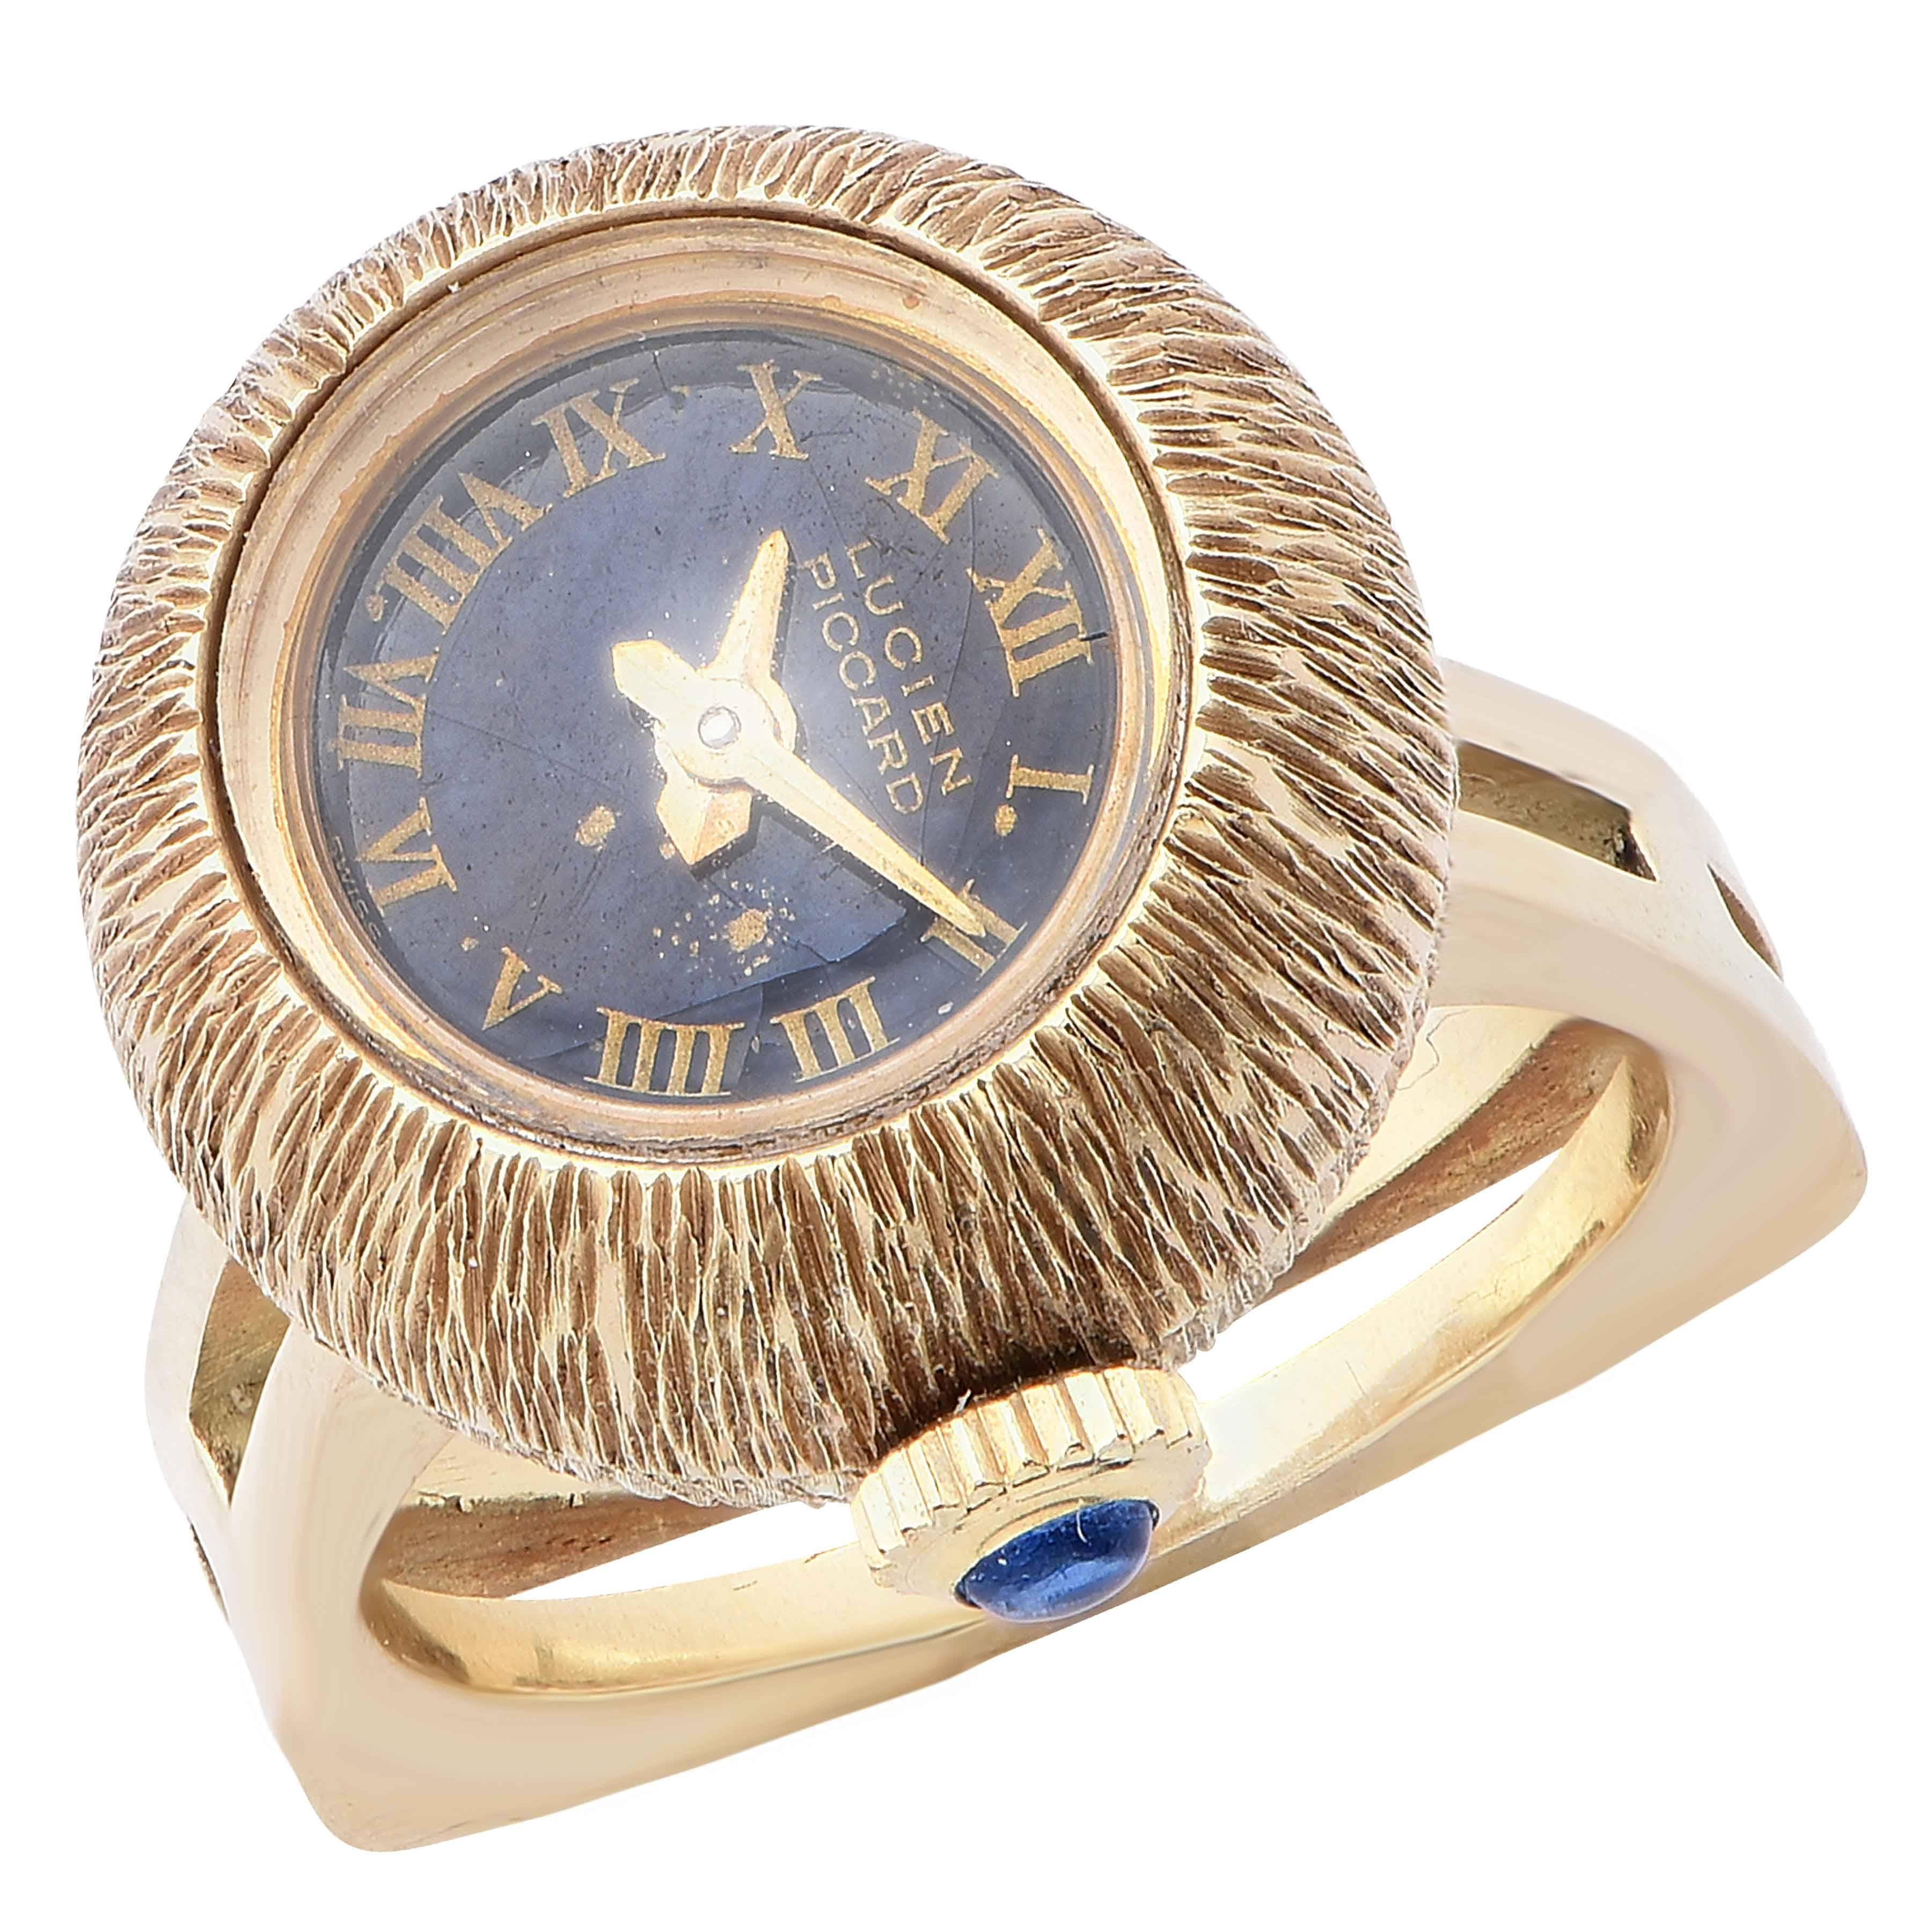 Lucien Picard lady's 14k yellow gold ring watch with manual-wind movement in a brushed gold case. The blue enamel dial has small losses (visible in the picture).

Ring size 5 1/2
Metal Type: 14Kt Yellow Gold
Metal Weight: 11.8 Grams
